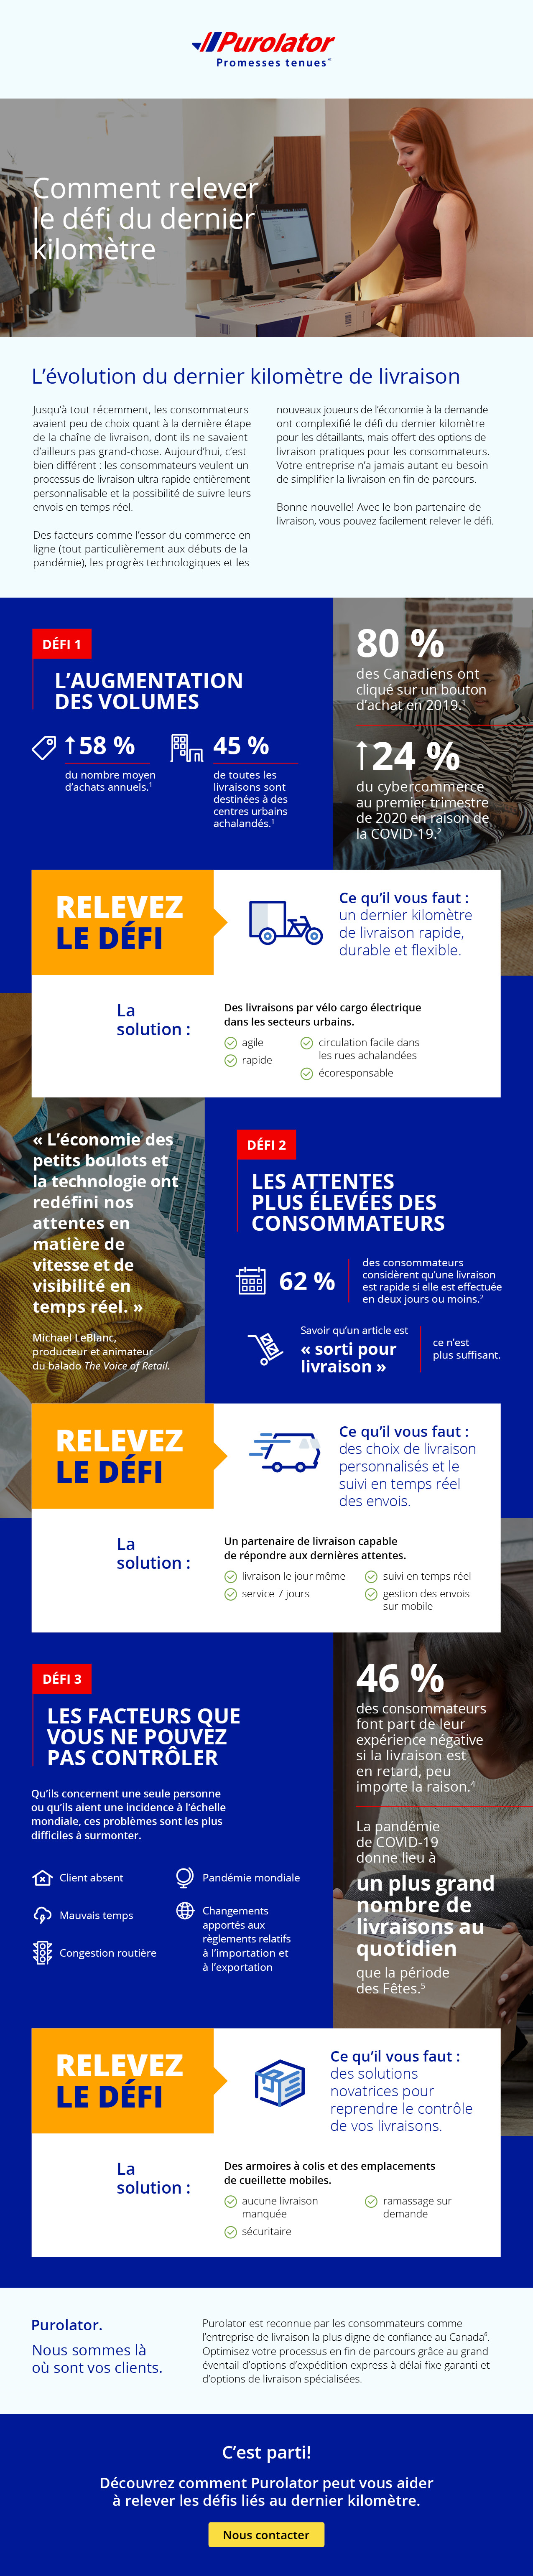 Purolator winning the last mile delivery challenge infographic French